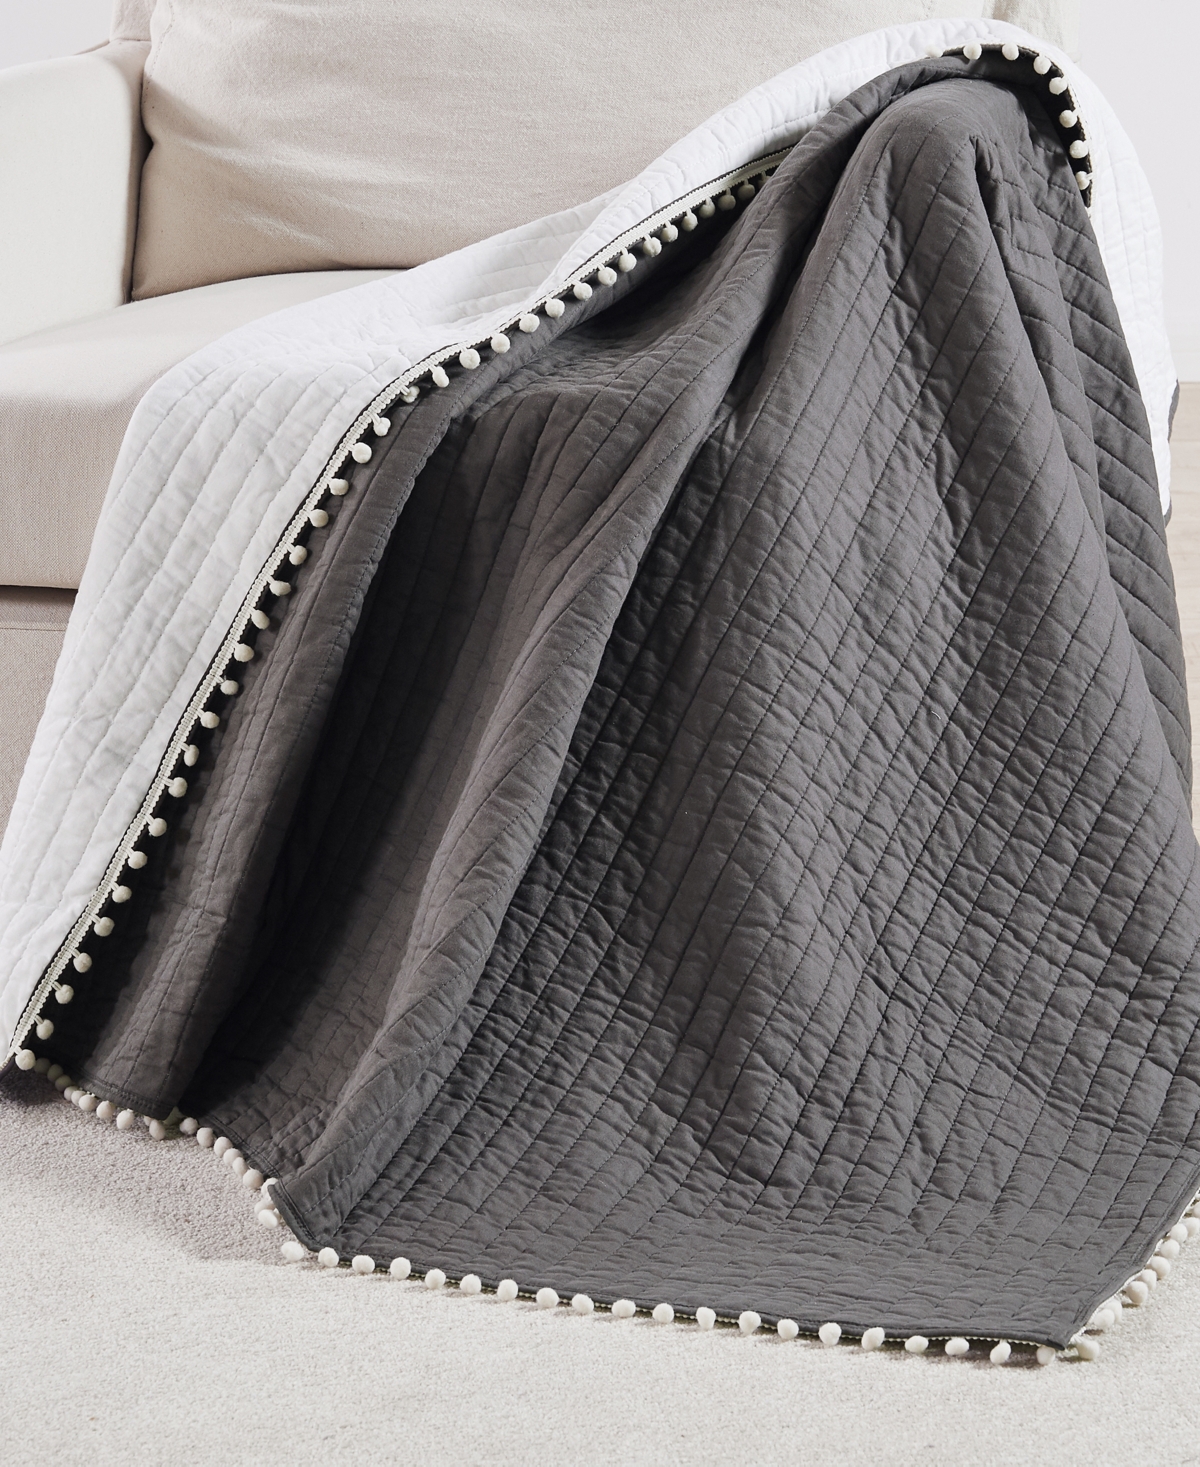 Levtex Pom Pom Reversible Quilted Throw, 50" X 60" In Slate